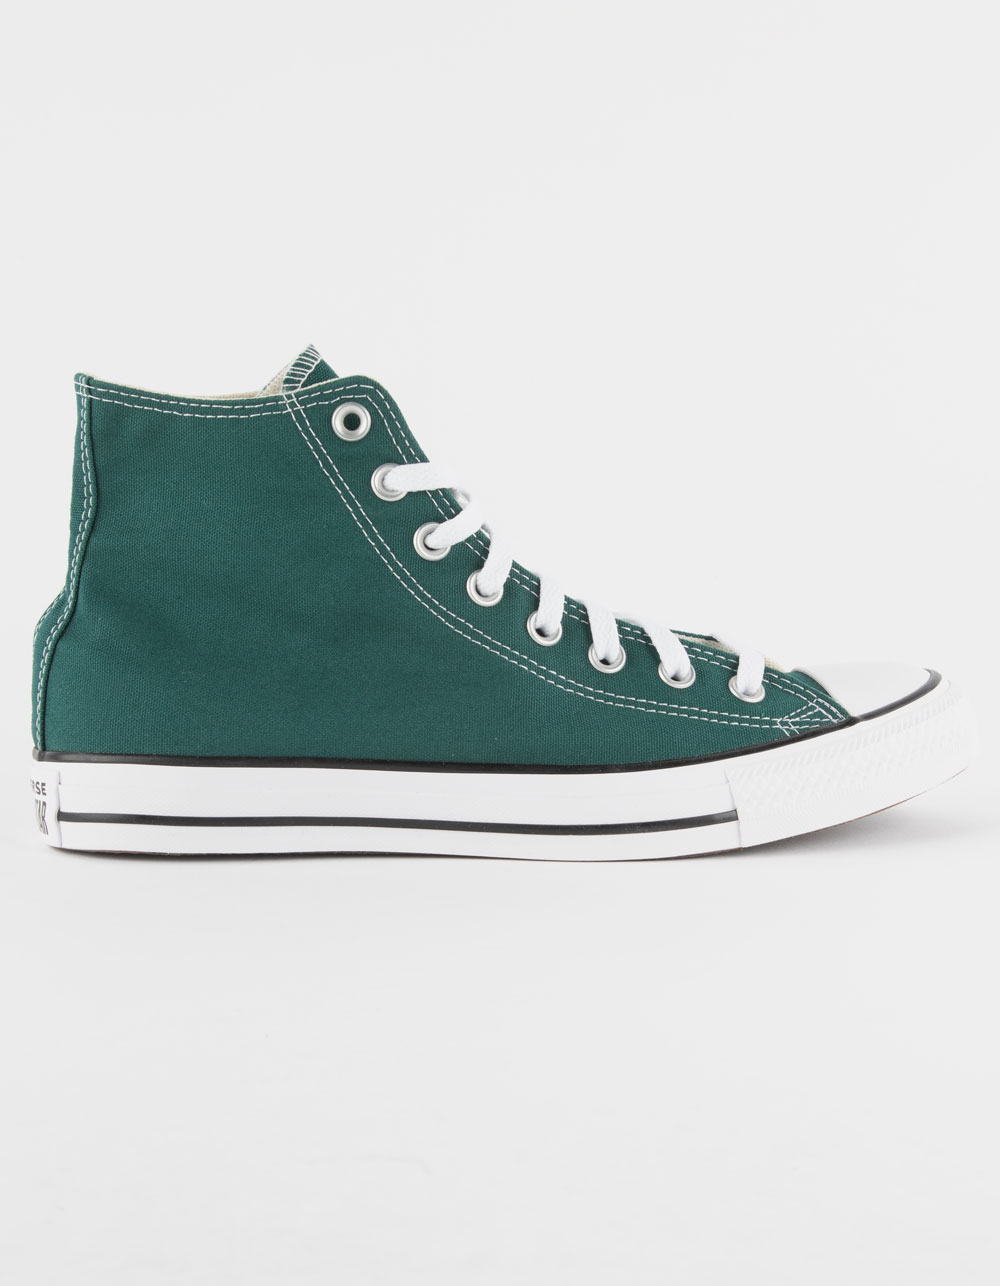 CONVERSE Chuck Taylor All Star High Top Shoes - FOREST | Tillys